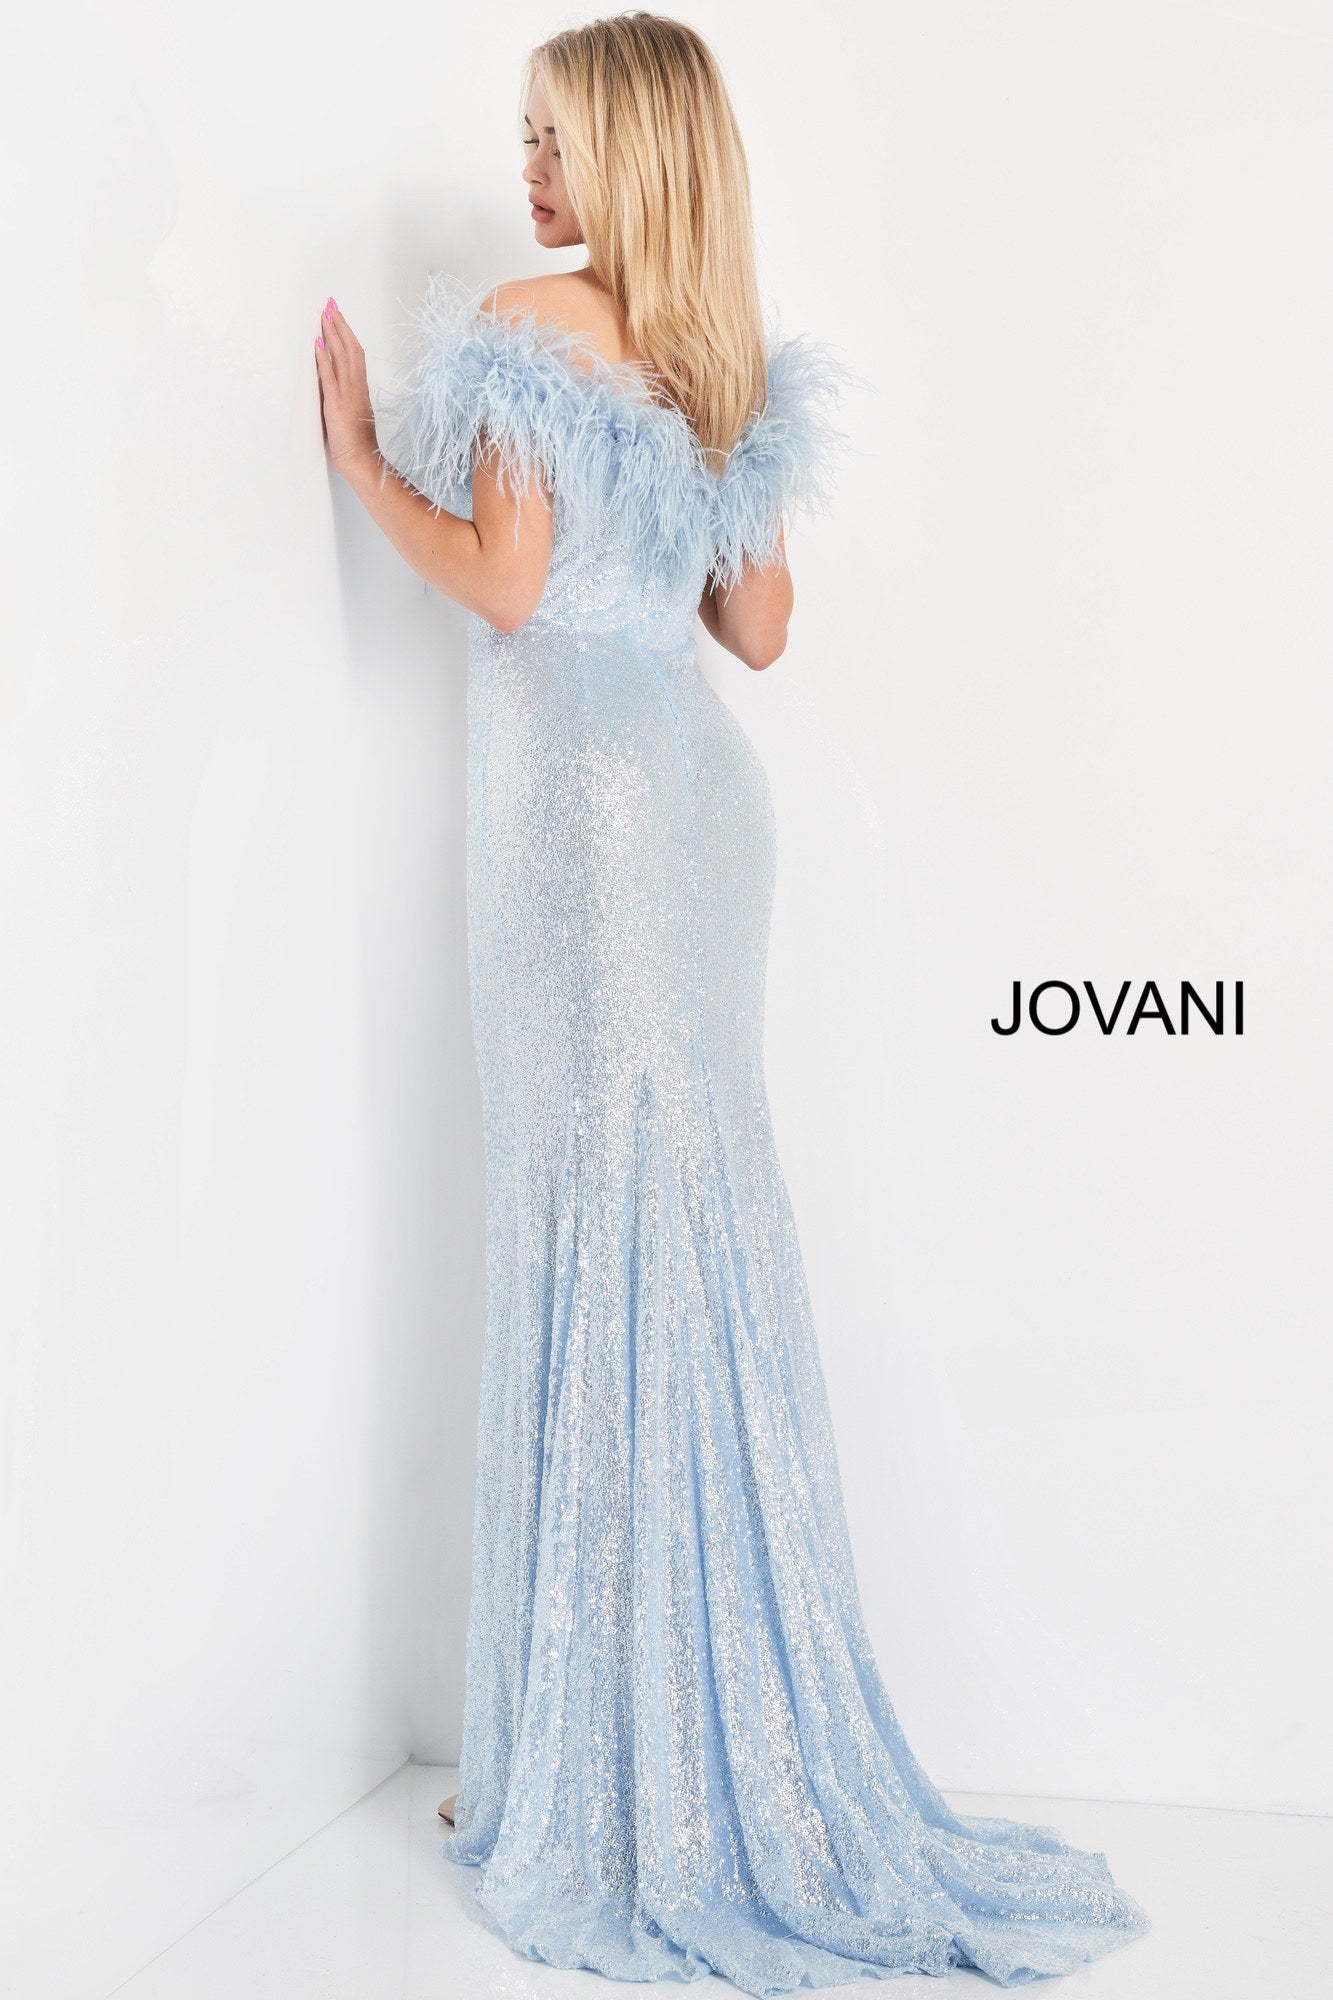 Jovani 06166 is a Long Fitted Sequin Formal Evening Gown. Featuring a Lush Feather Accented sweetheart neckline & off the shoulder straps. This Fit & Flare Pageant & Prom Dress has a stunning sequin sweeping train. Great for any Formal Event! Available Sizes: 00,0,2,4,6,8,10,12,14,16,18,20,22,24  Available Colors: blue, ice pink, ivory, red